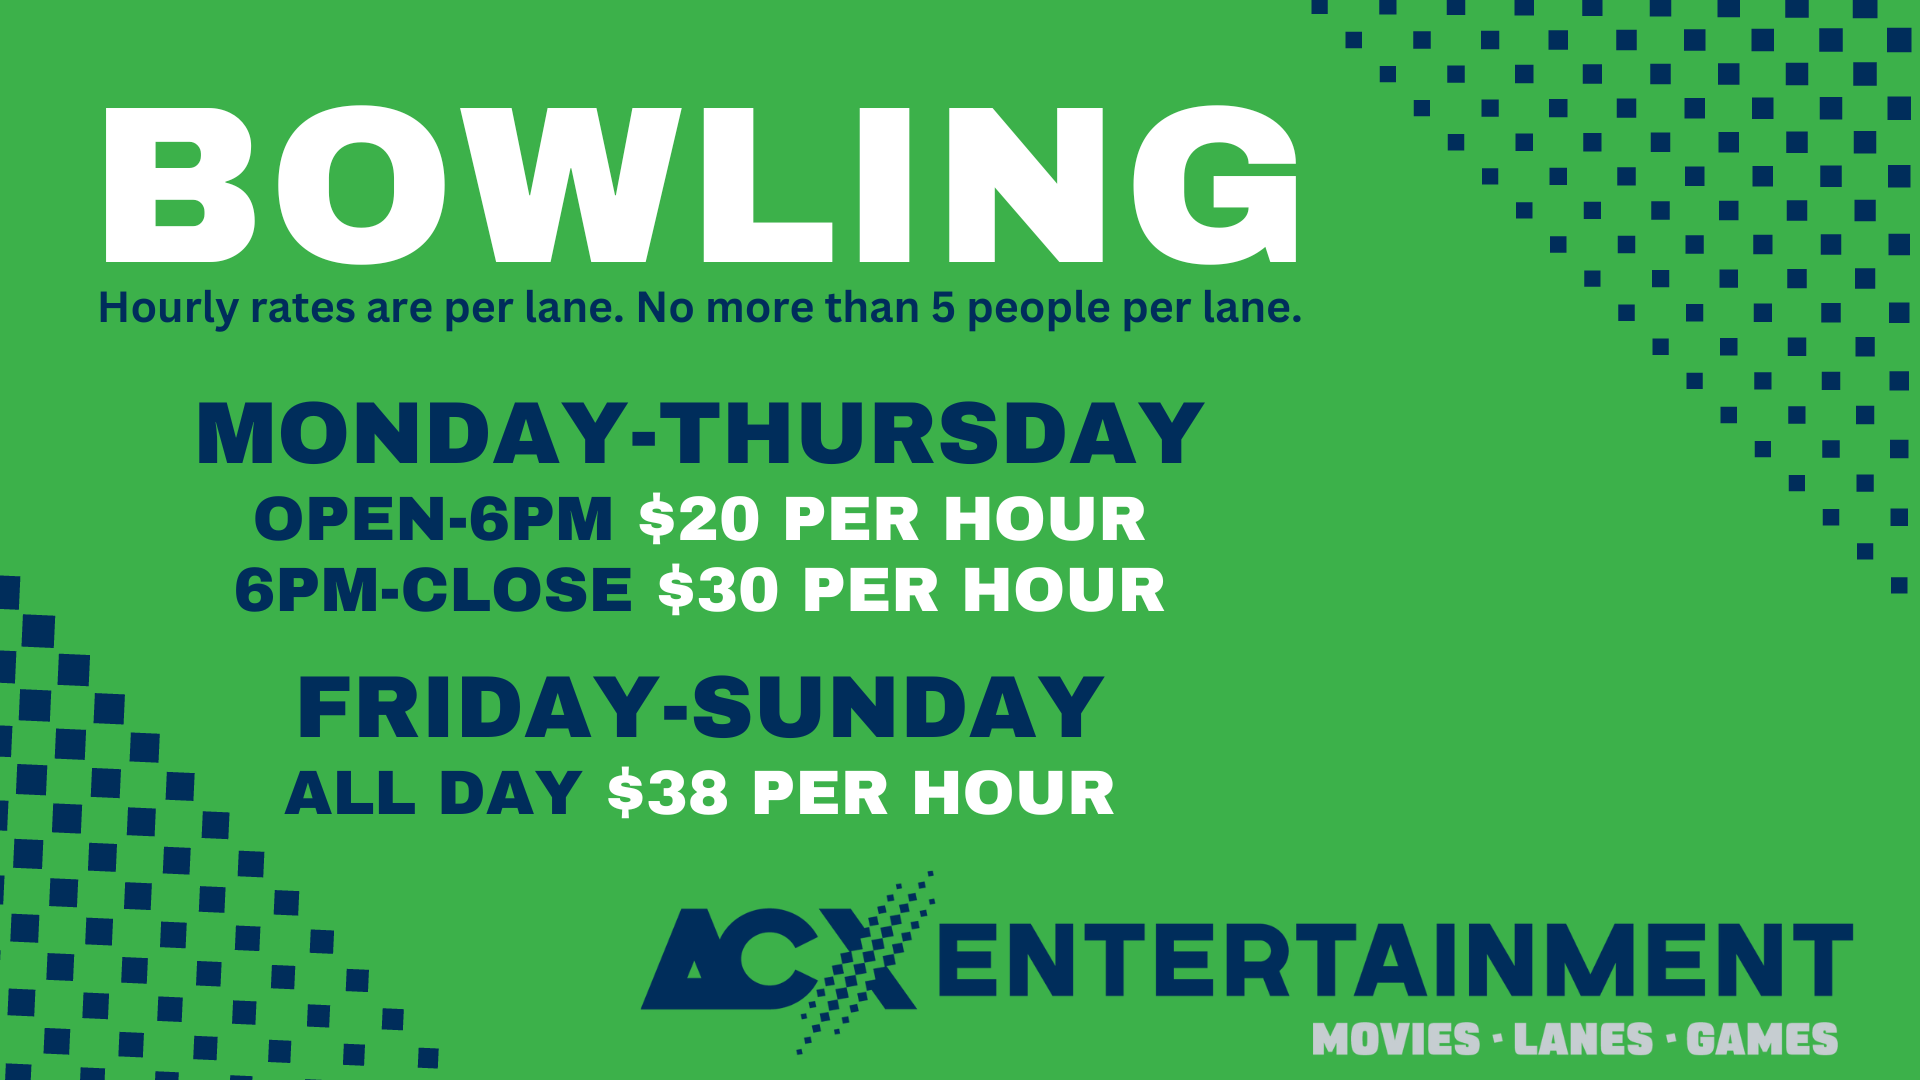 Bowling Info Graphic